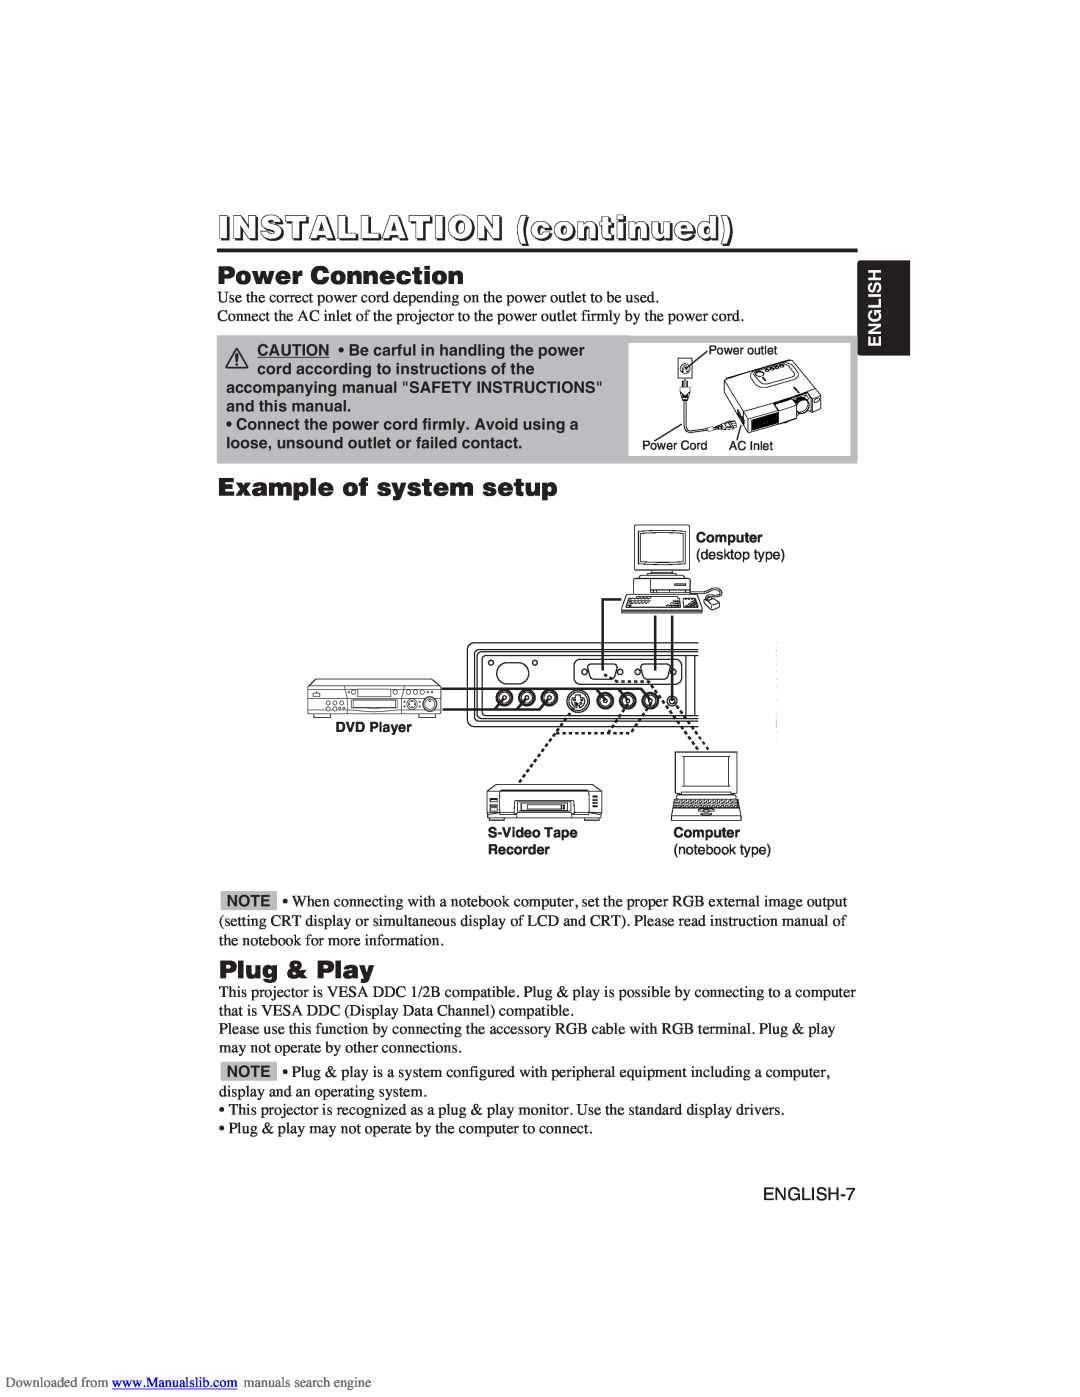 Hitachi CP-X275W user manual Power Connection, Example of system setup, Plug & Play, INSTALLATION continued, English 